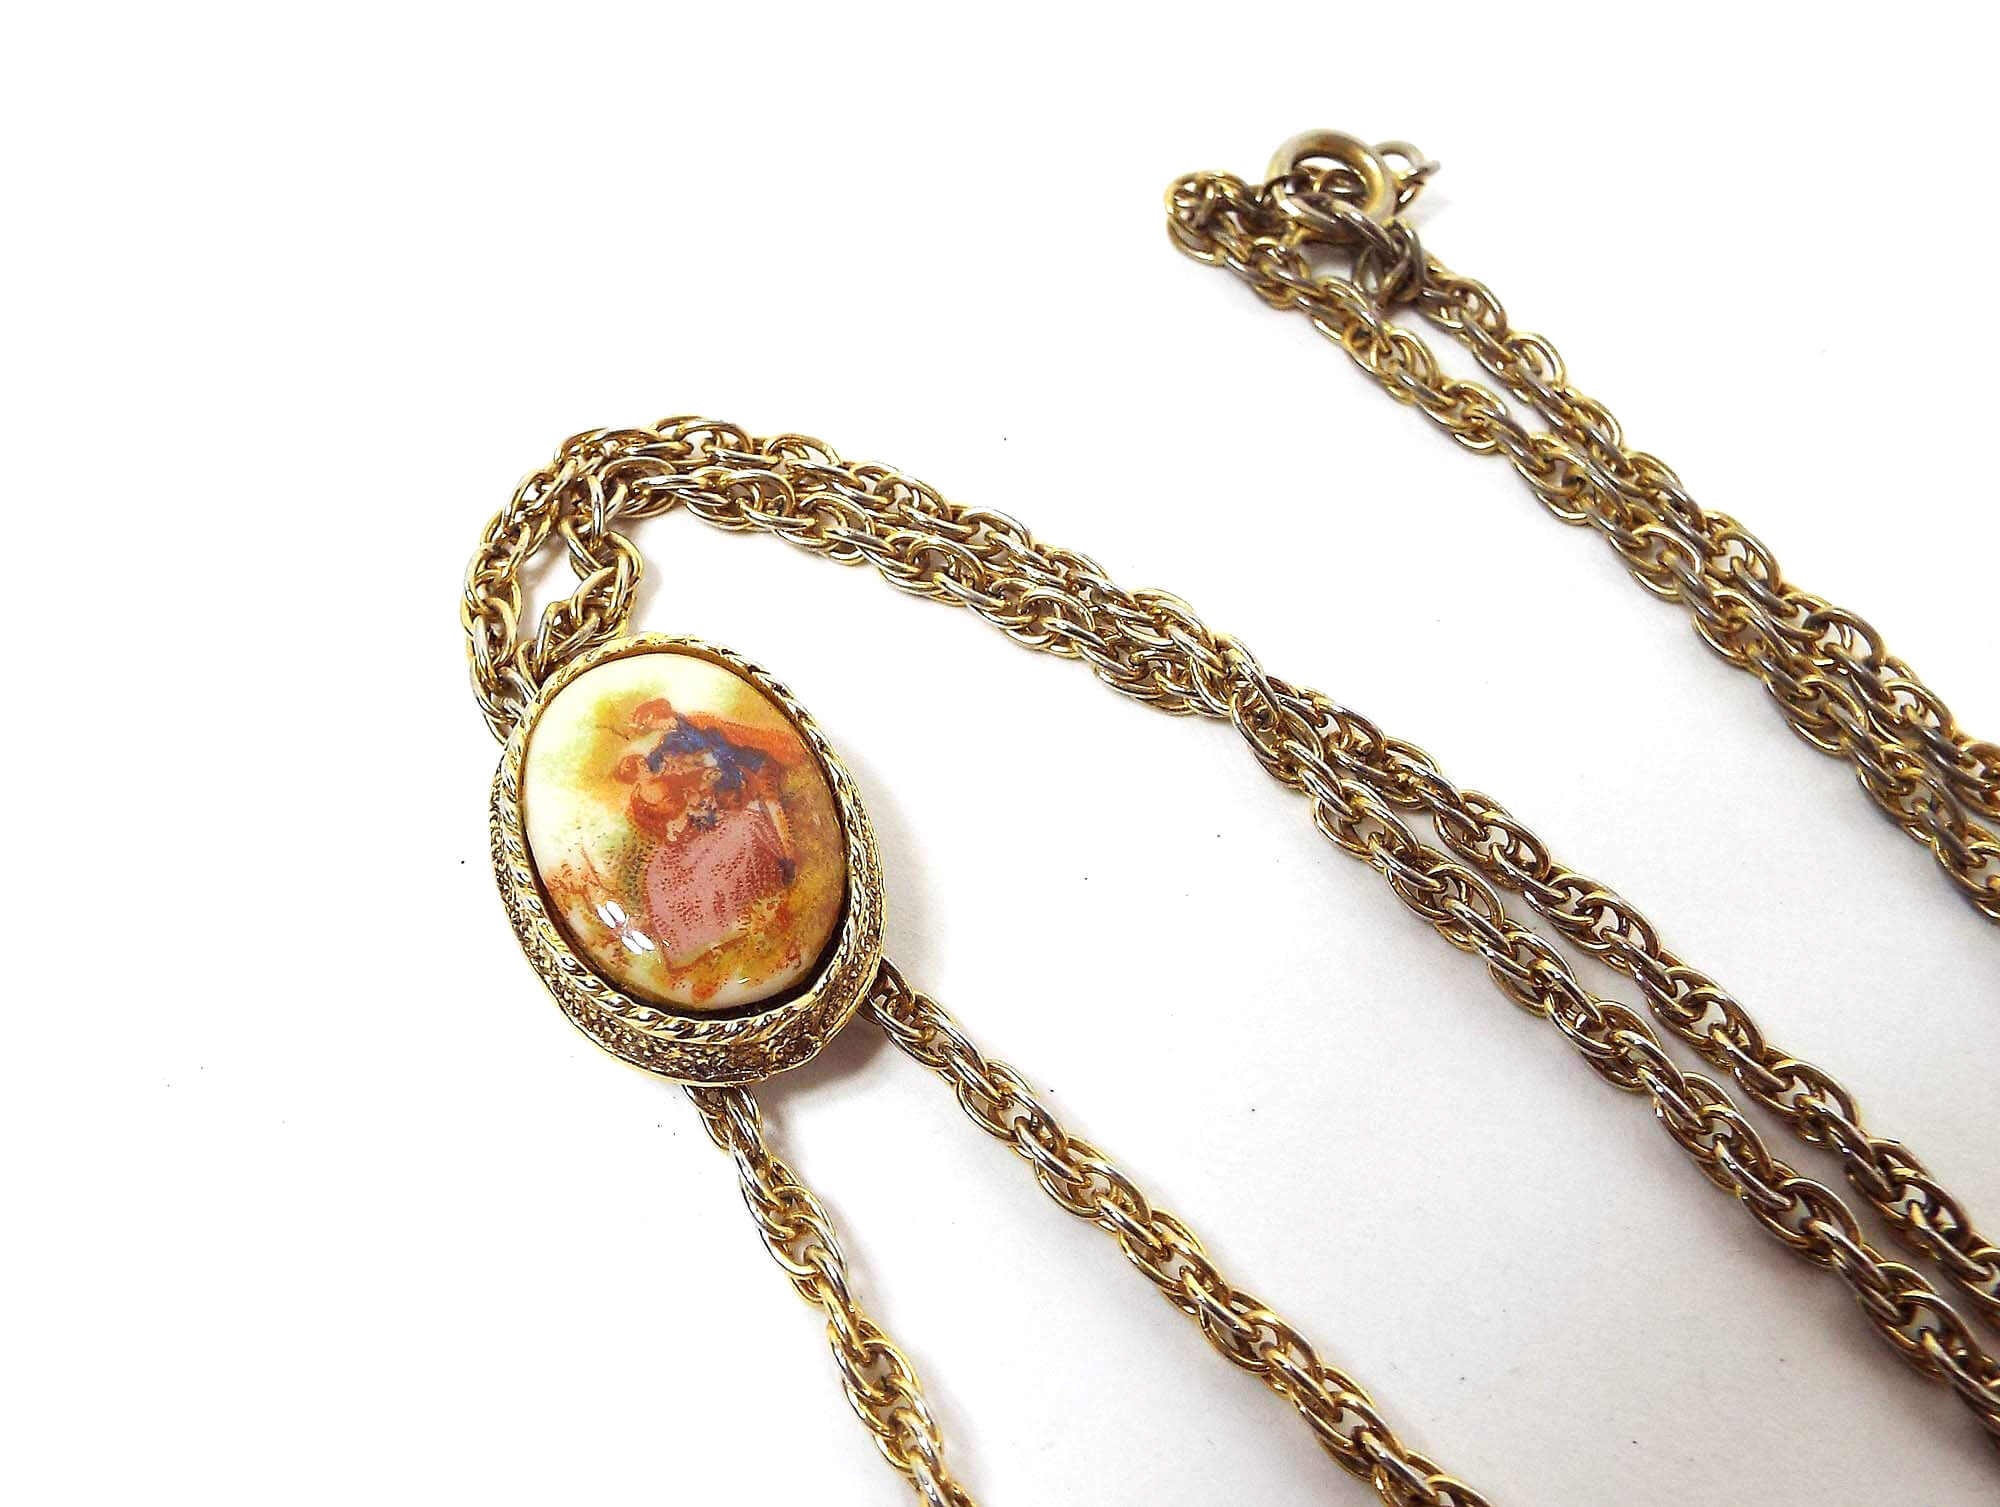 Vintage Cameo Pendant Necklace with Faux Pearls